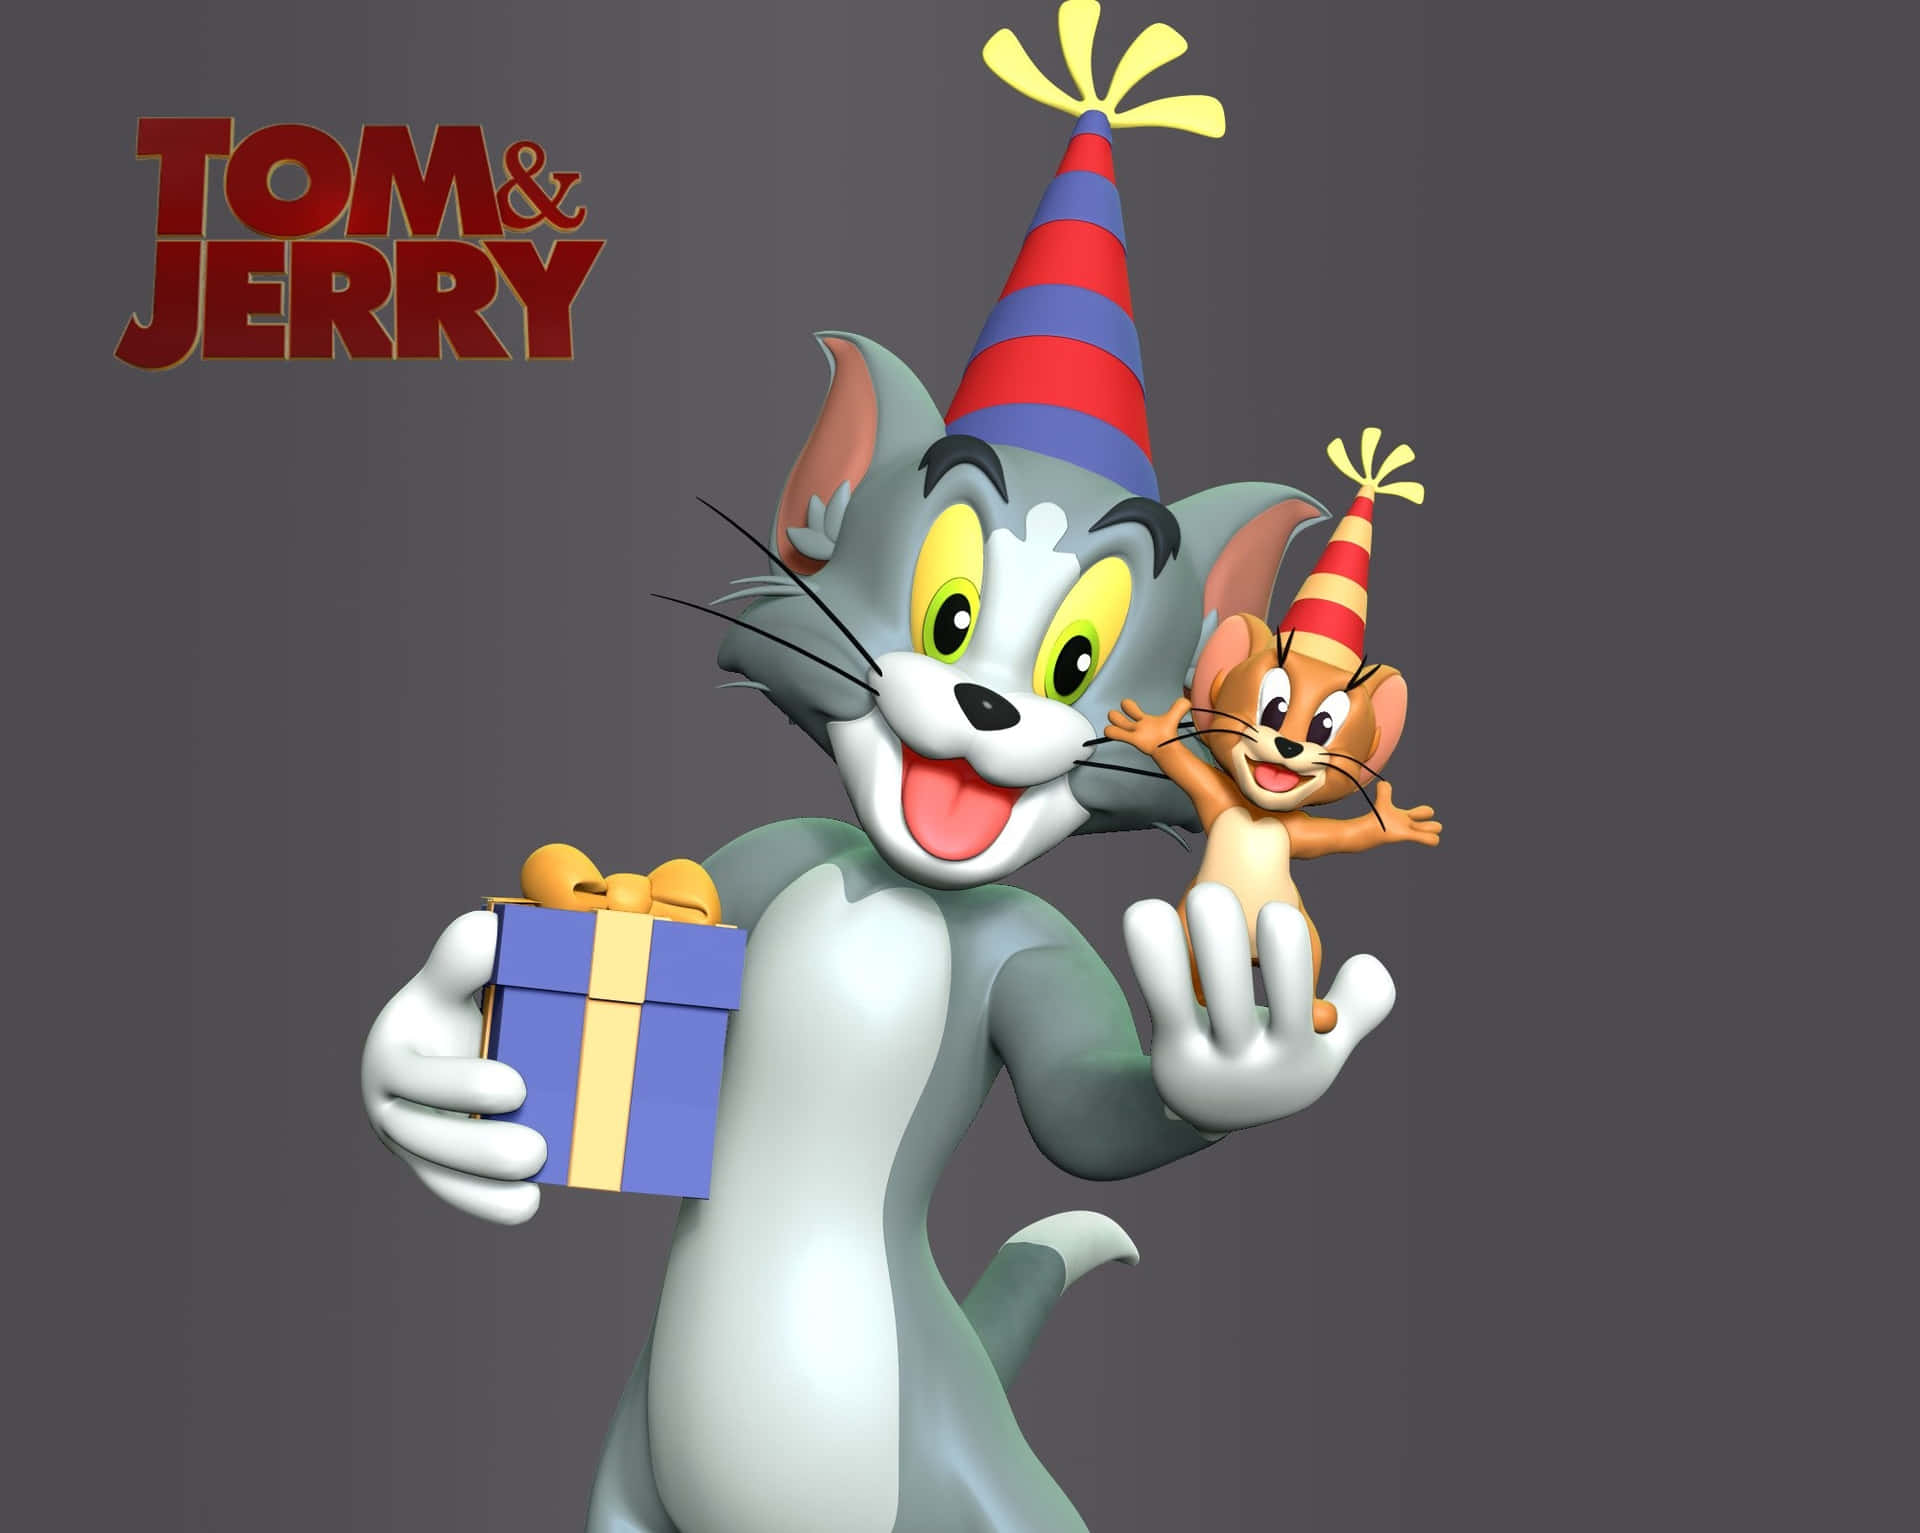 Tom and Jerry have yet another funny and wild adventure as they run around the house. Wallpaper